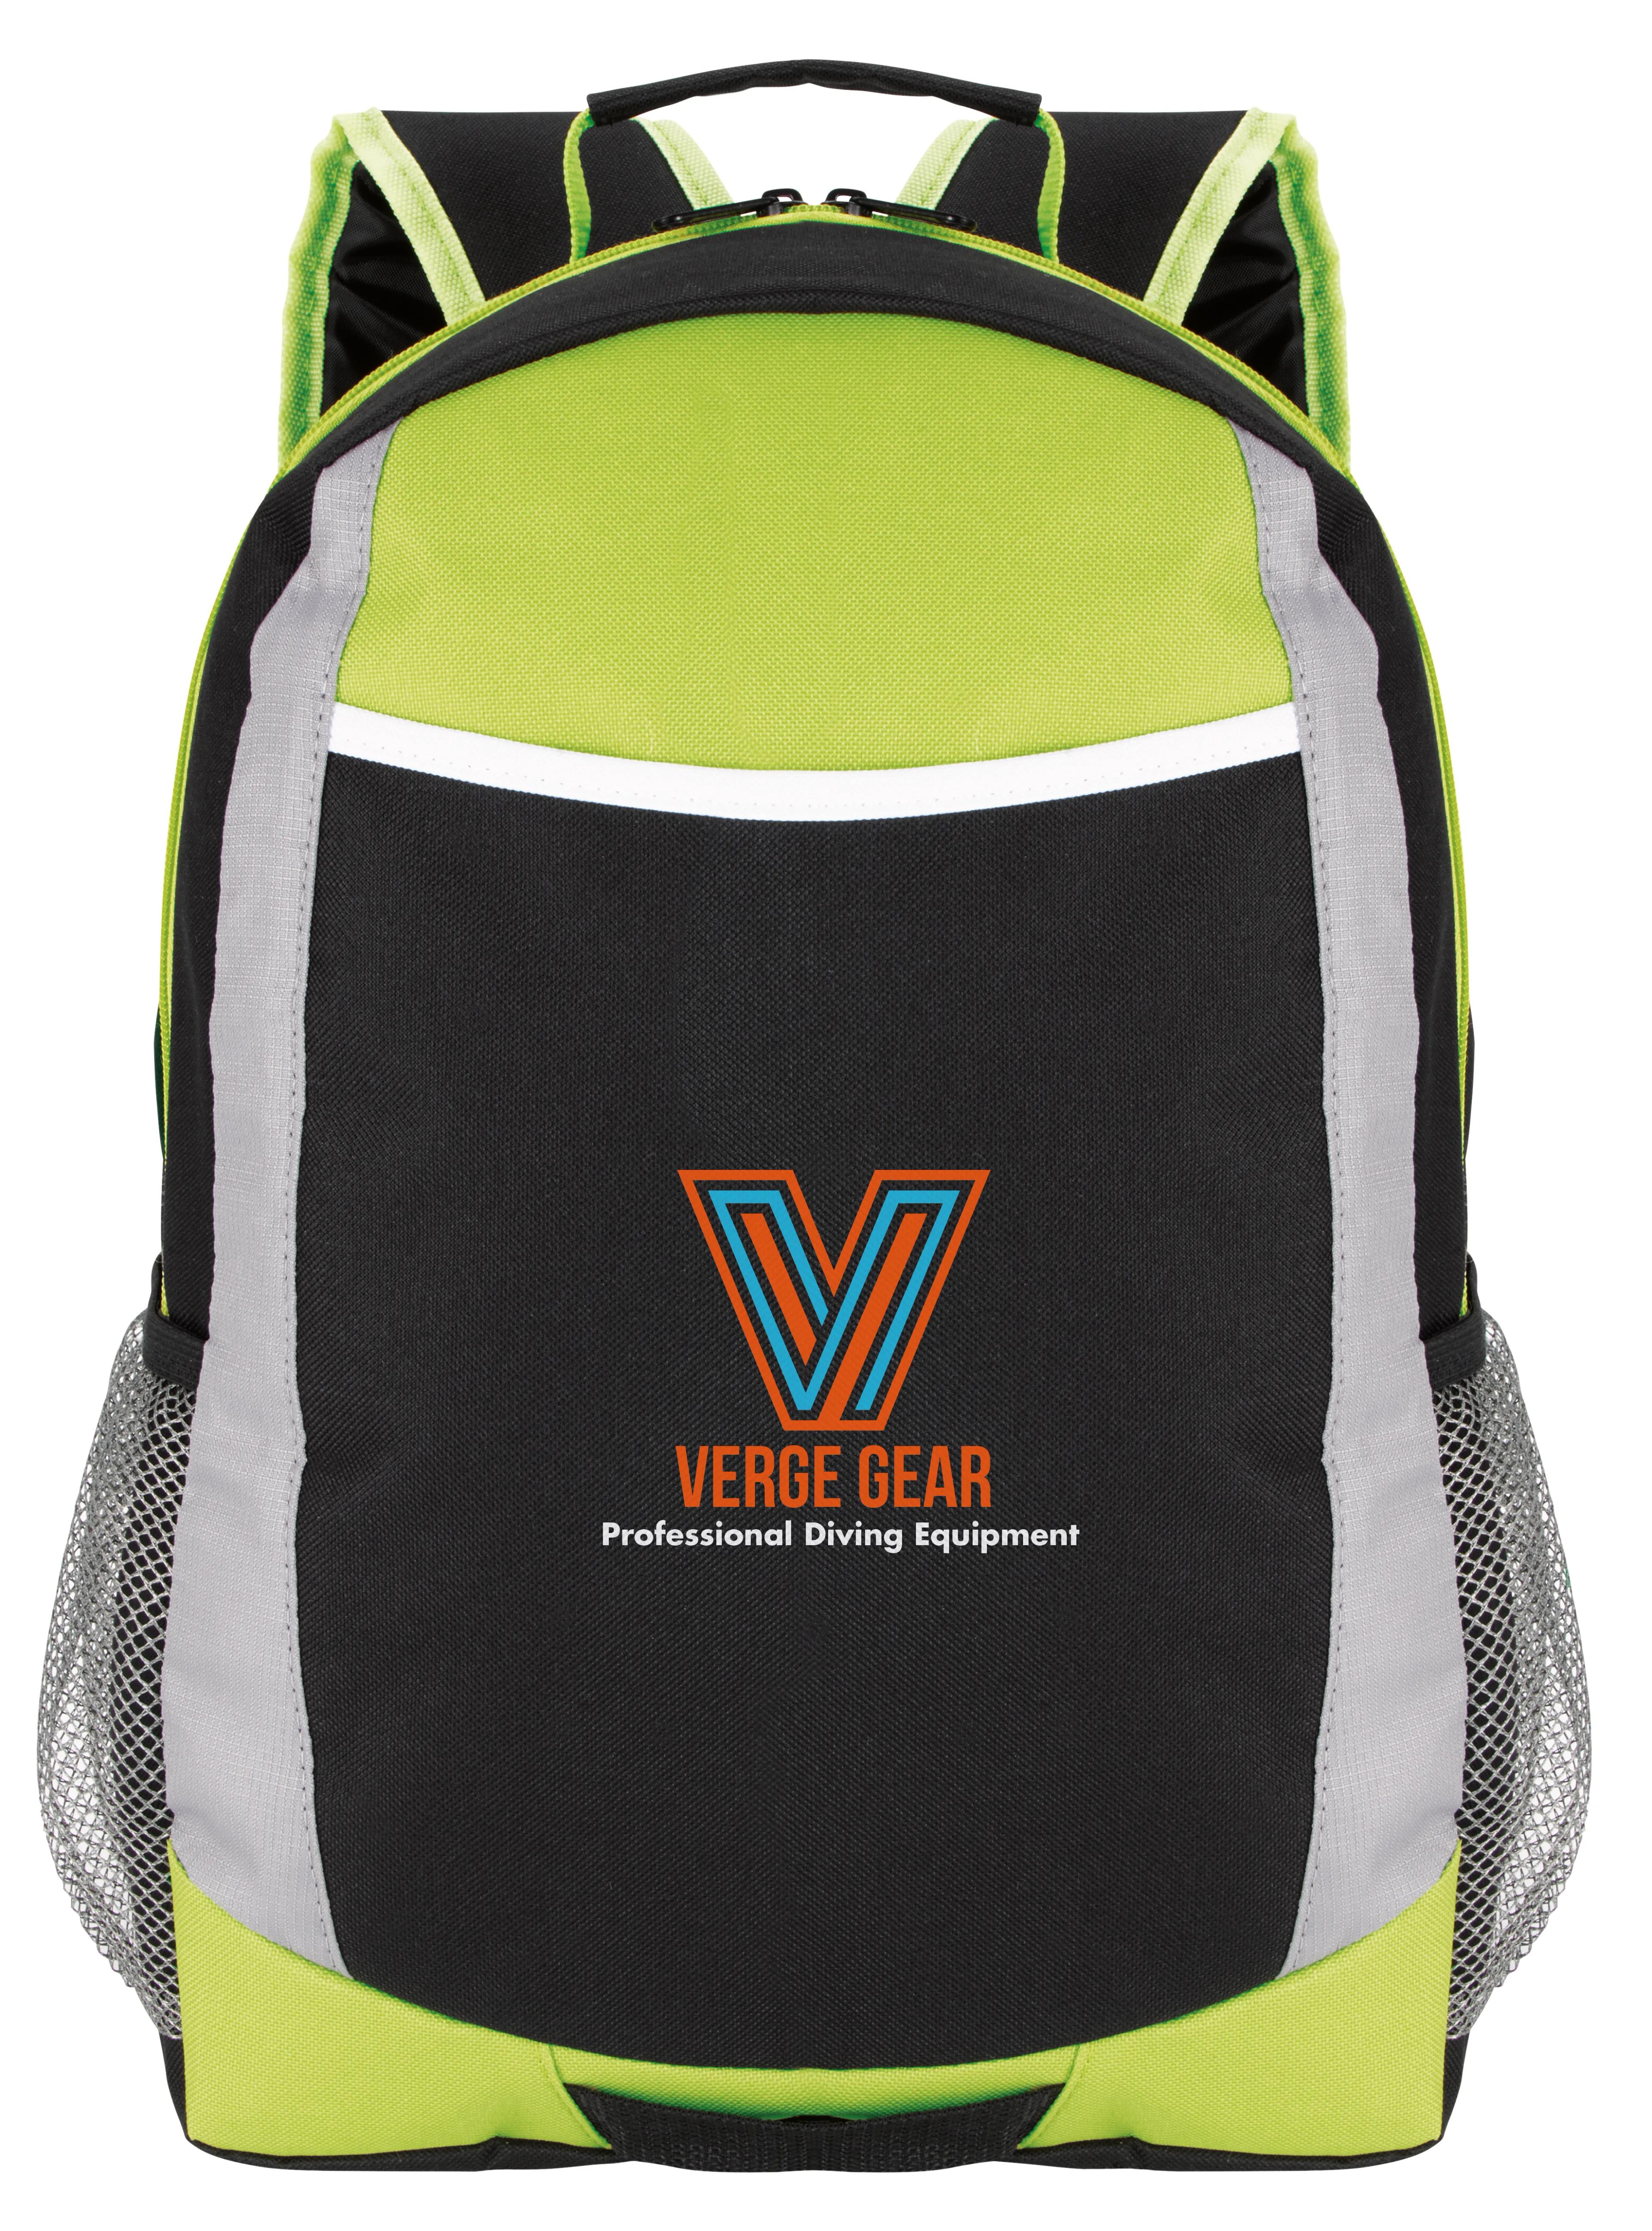 Primary Sport Backpack 8 of 14